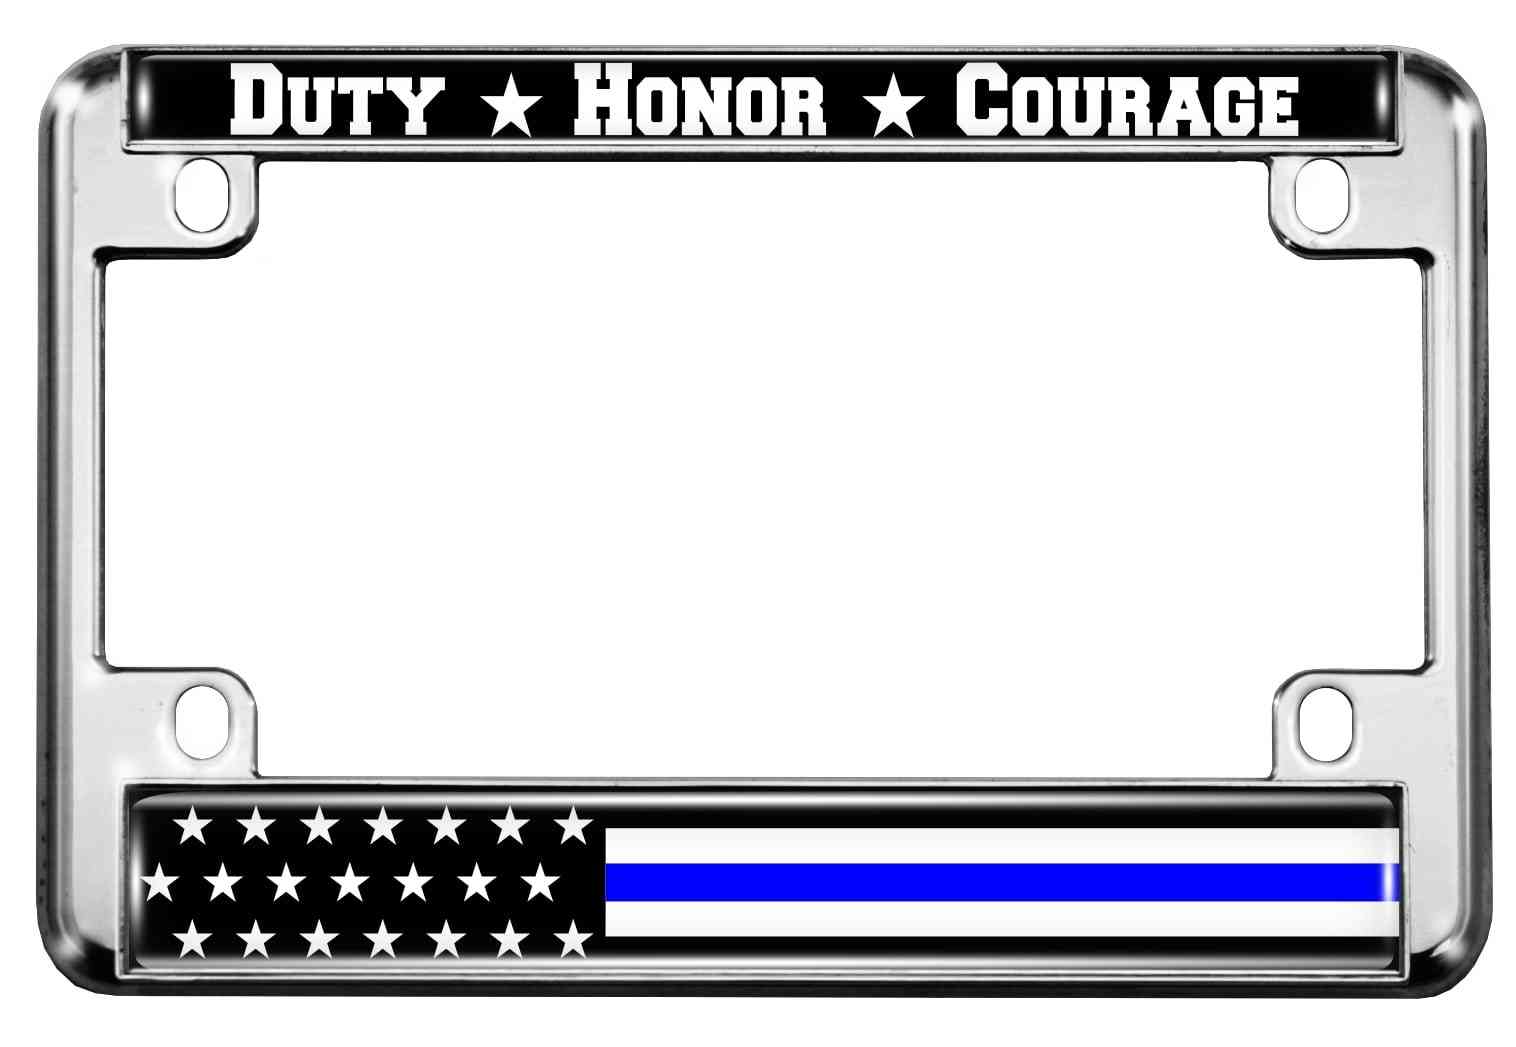 Duty Honor Courage Thin Blue Line U.S. Flag - Motorcycle Metal License Plate Frame